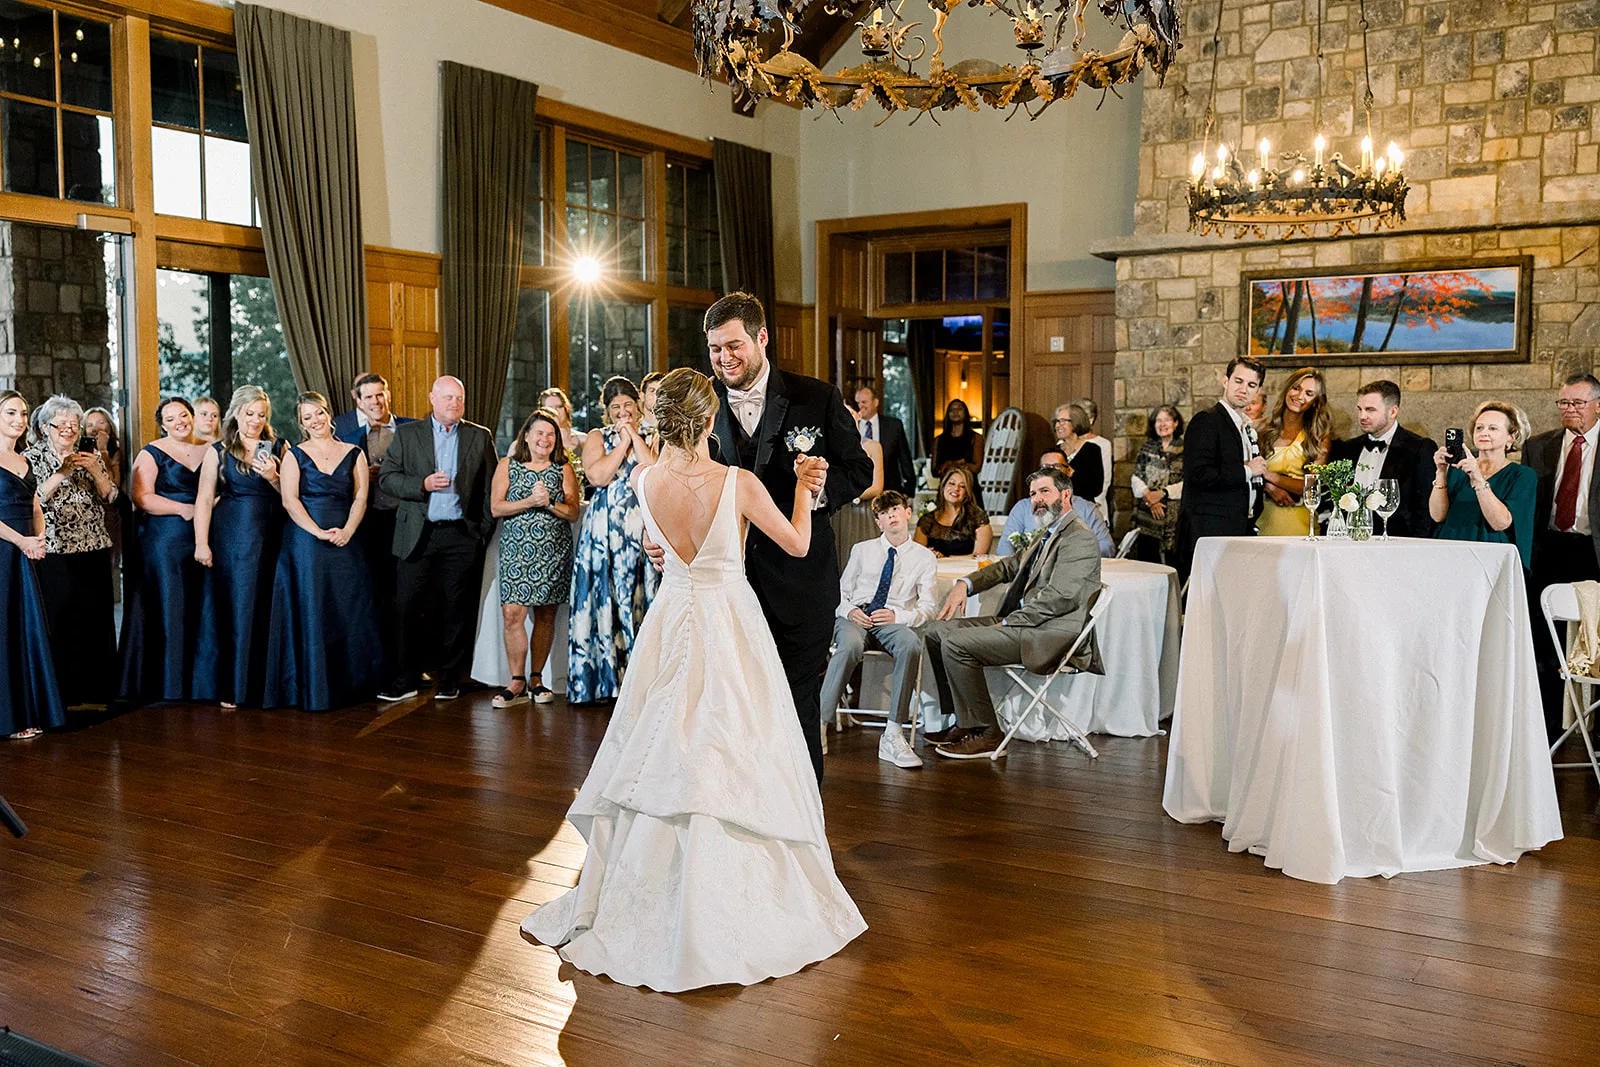 Newlyweds dance for the first time in front of their guests at the Curahee Club Wedding venue